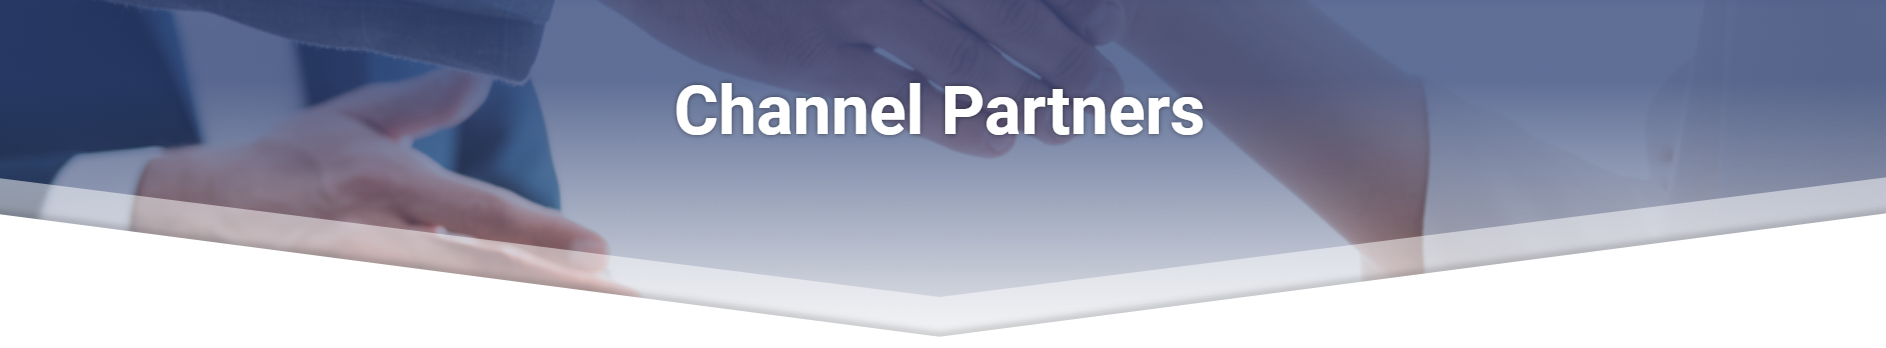 Channel Partners Header